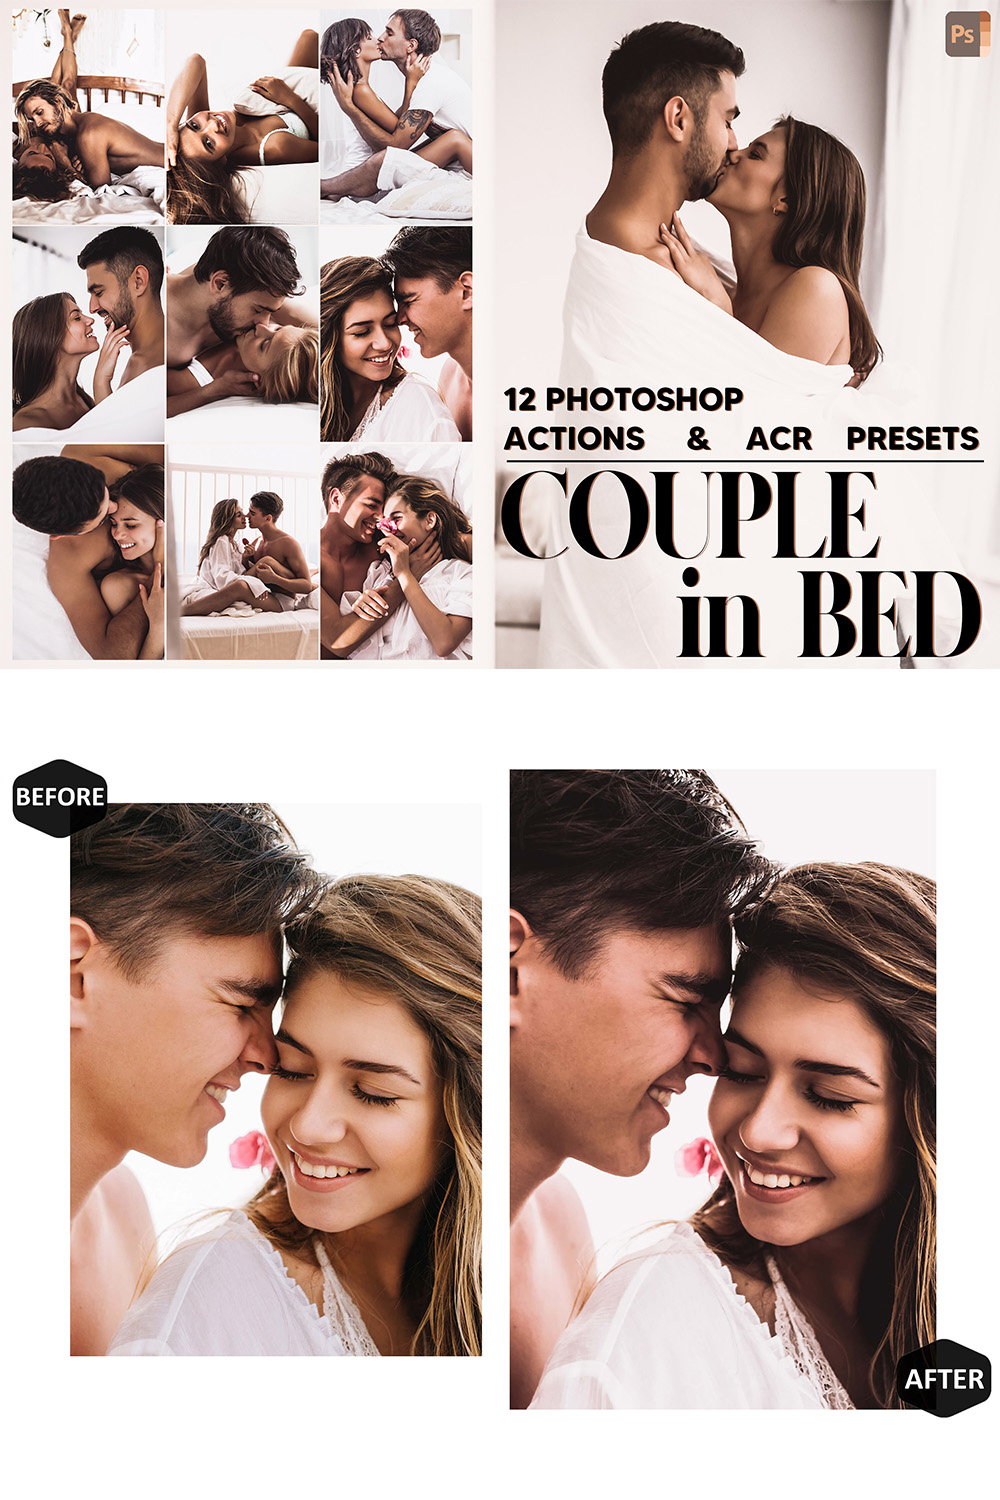 12 Photoshop Actions, Couple In Bed Ps Action, White ACR Preset, Late Ps Filter, Atn Portrait And Lifestyle Theme For Instagram, Blogger pinterest preview image.